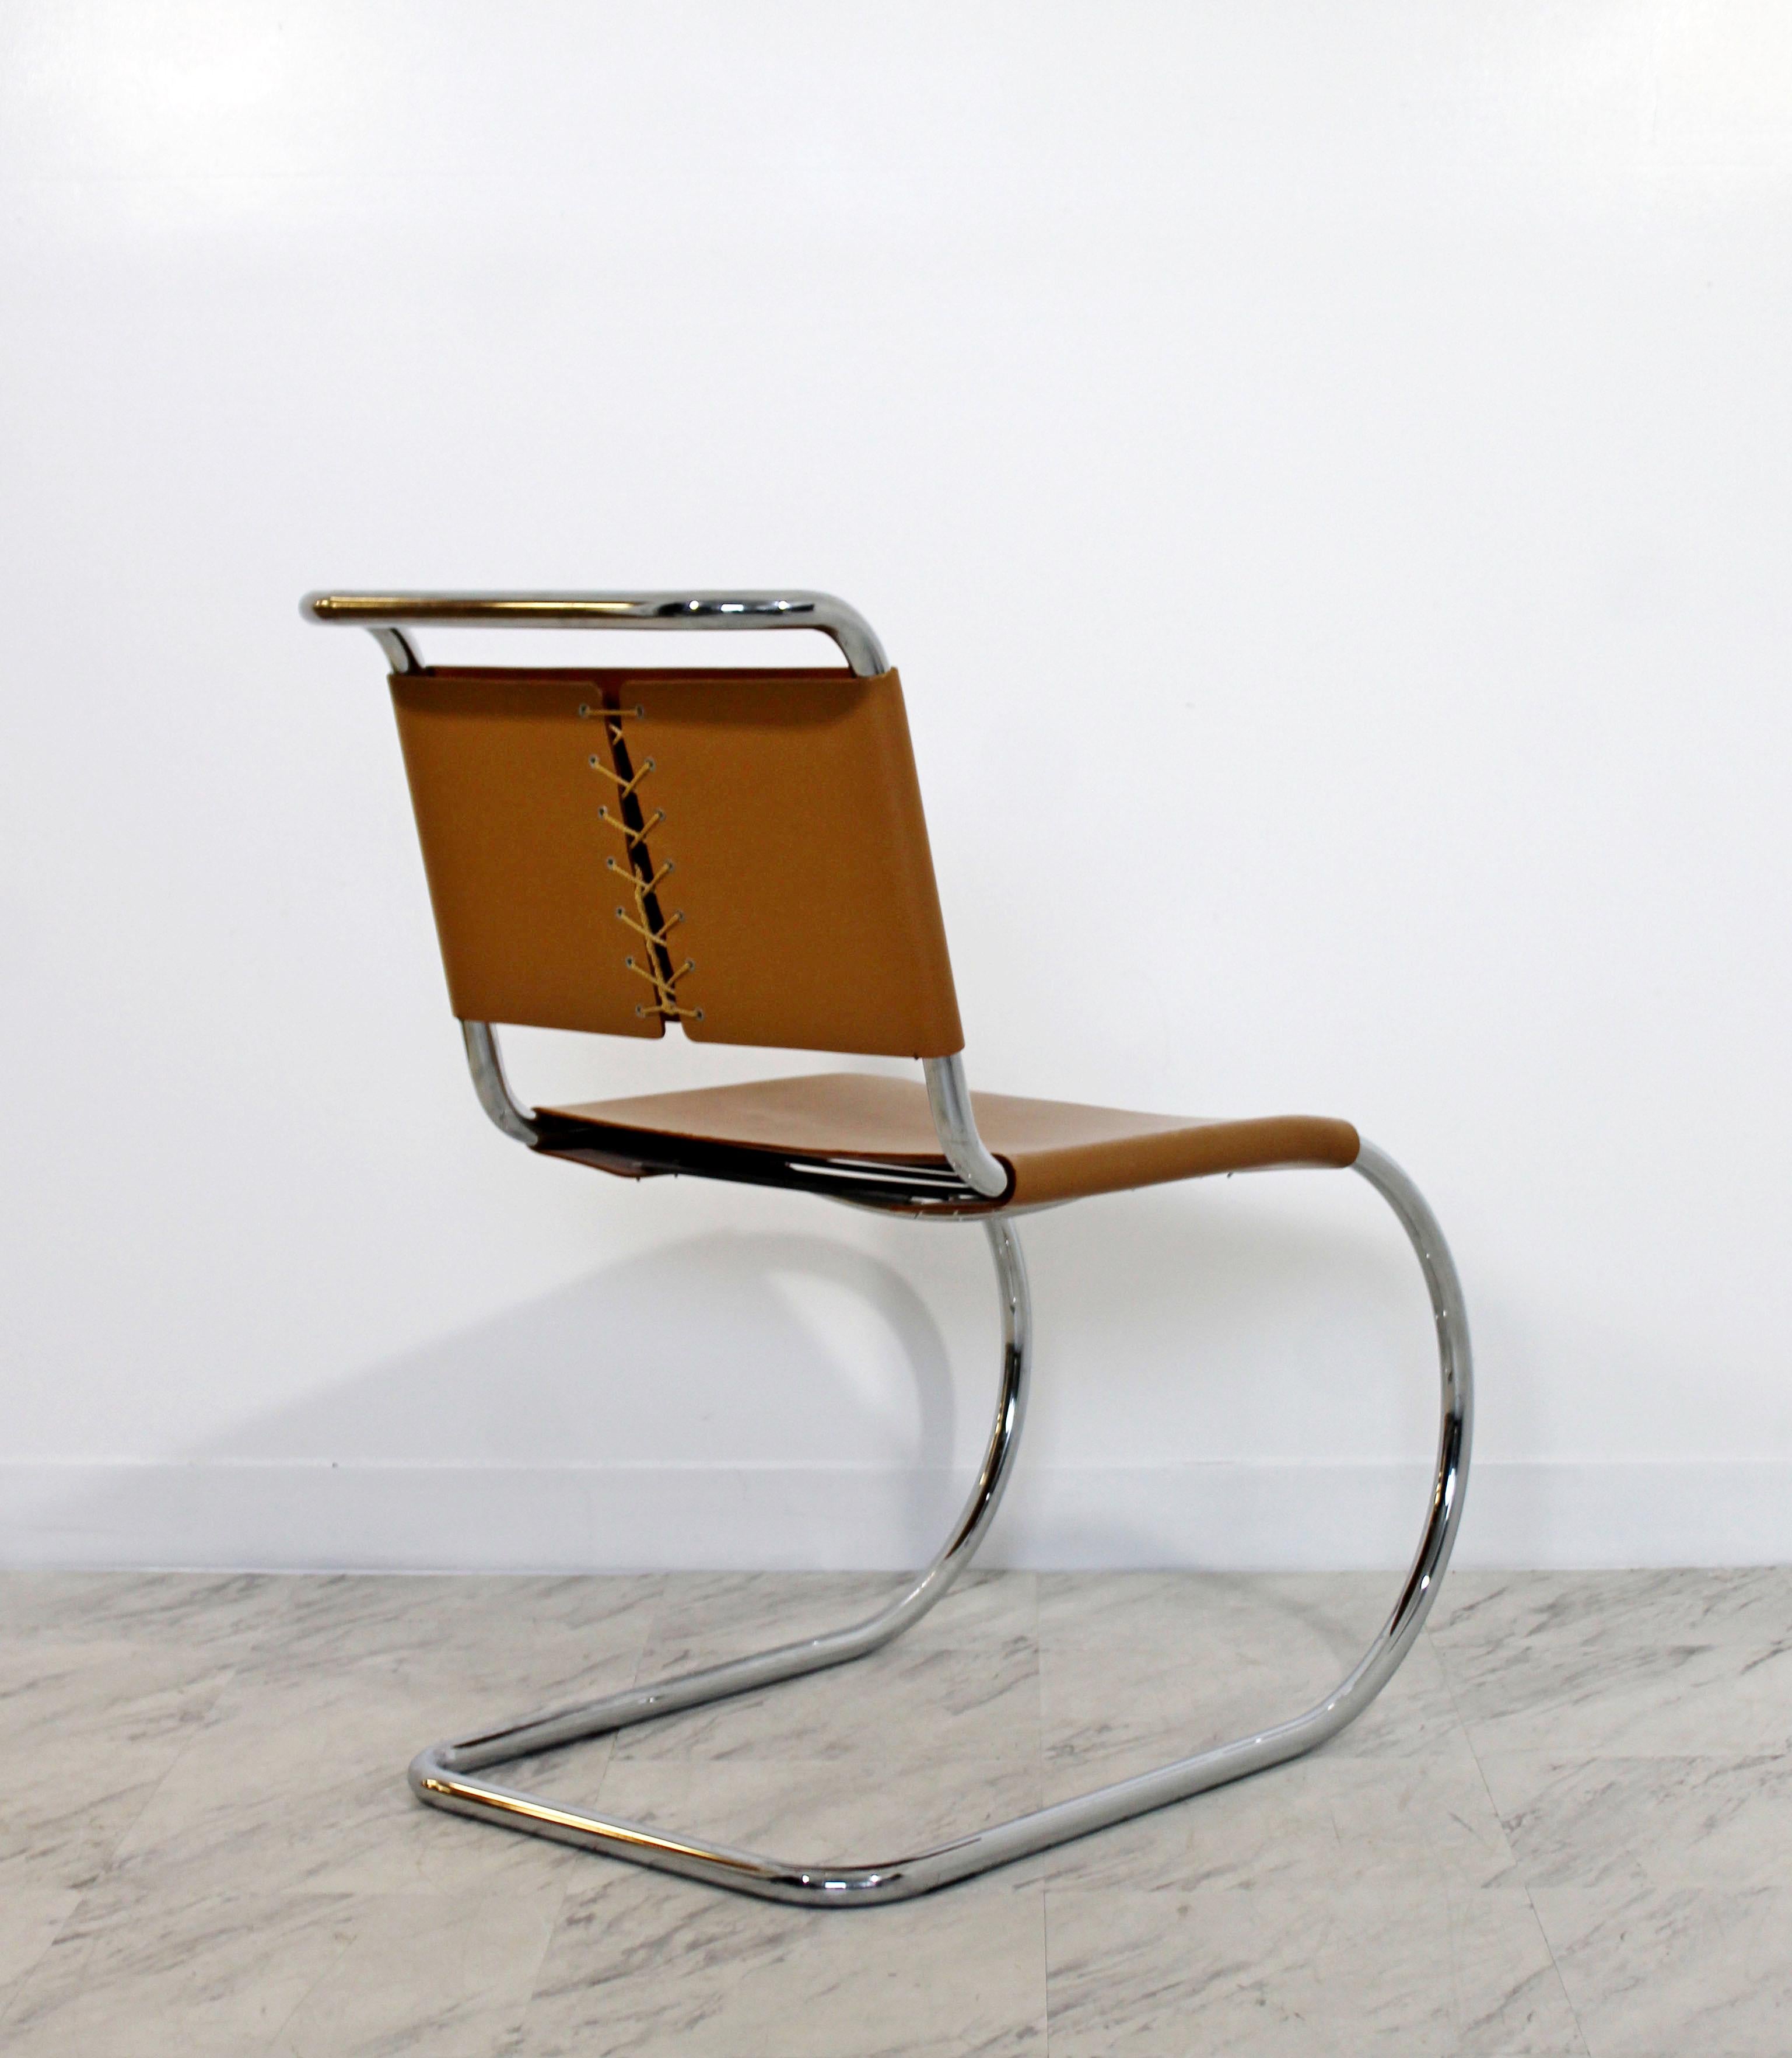 Late 20th Century Mid-Century Modern Mies Van Der Rohe Knoll Mr Leather Chrome Chair 1970s, Italy